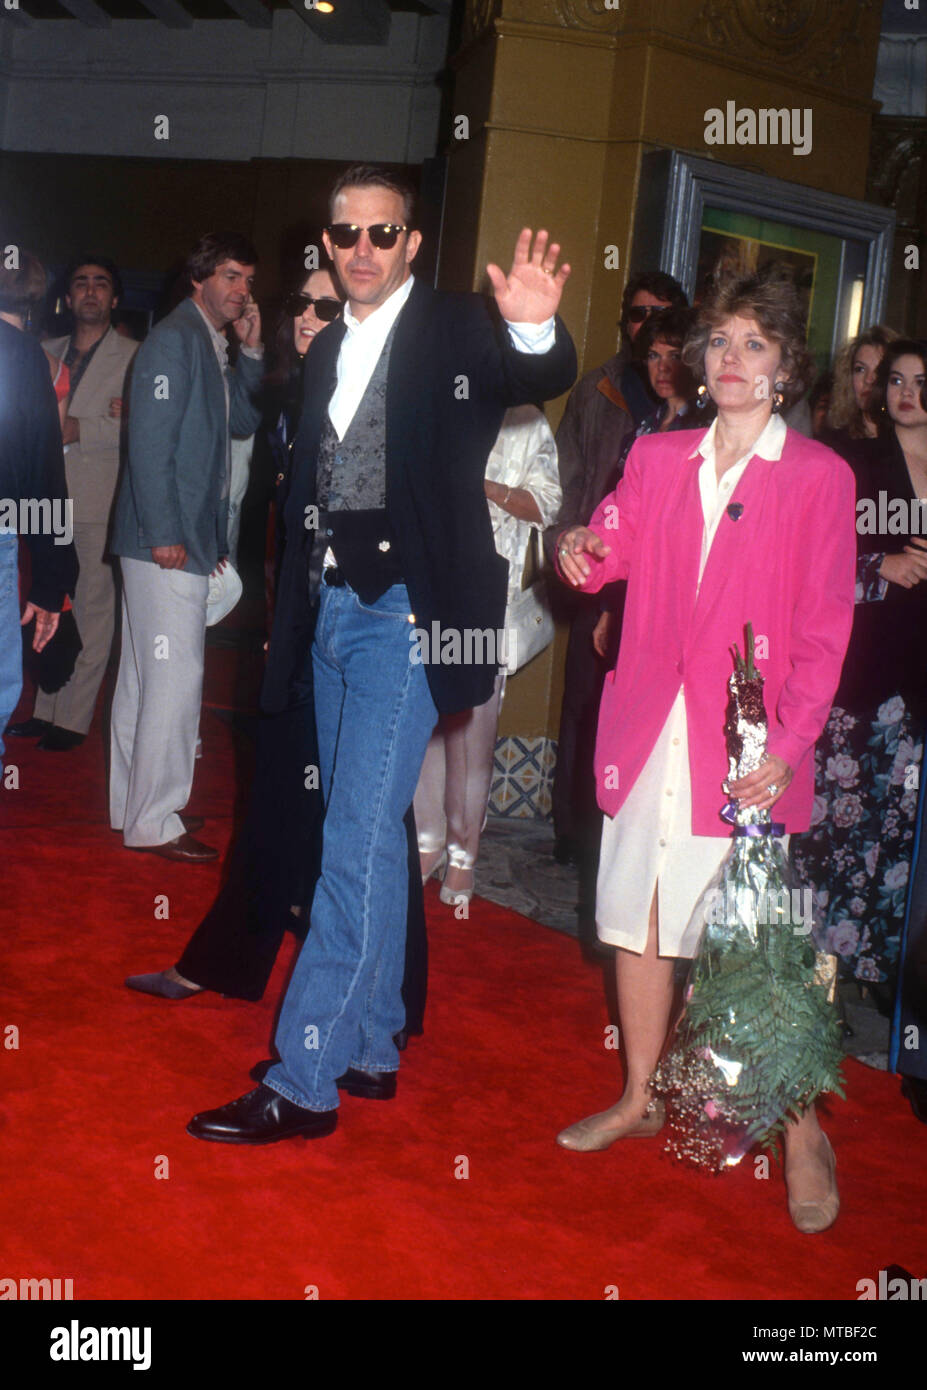 LOS ANGELES, CA - JUNE 10: (L-R) Cindy Costner and actor Kevin Costner attend the 'Robin Hood: Prince of Thieves' Westwood Premiere on June 10, 1991 at the Mann Village and Bruin Theatres in Los Angeles, California. Photo by Barry King/Alamy Stock Photo Stock Photo